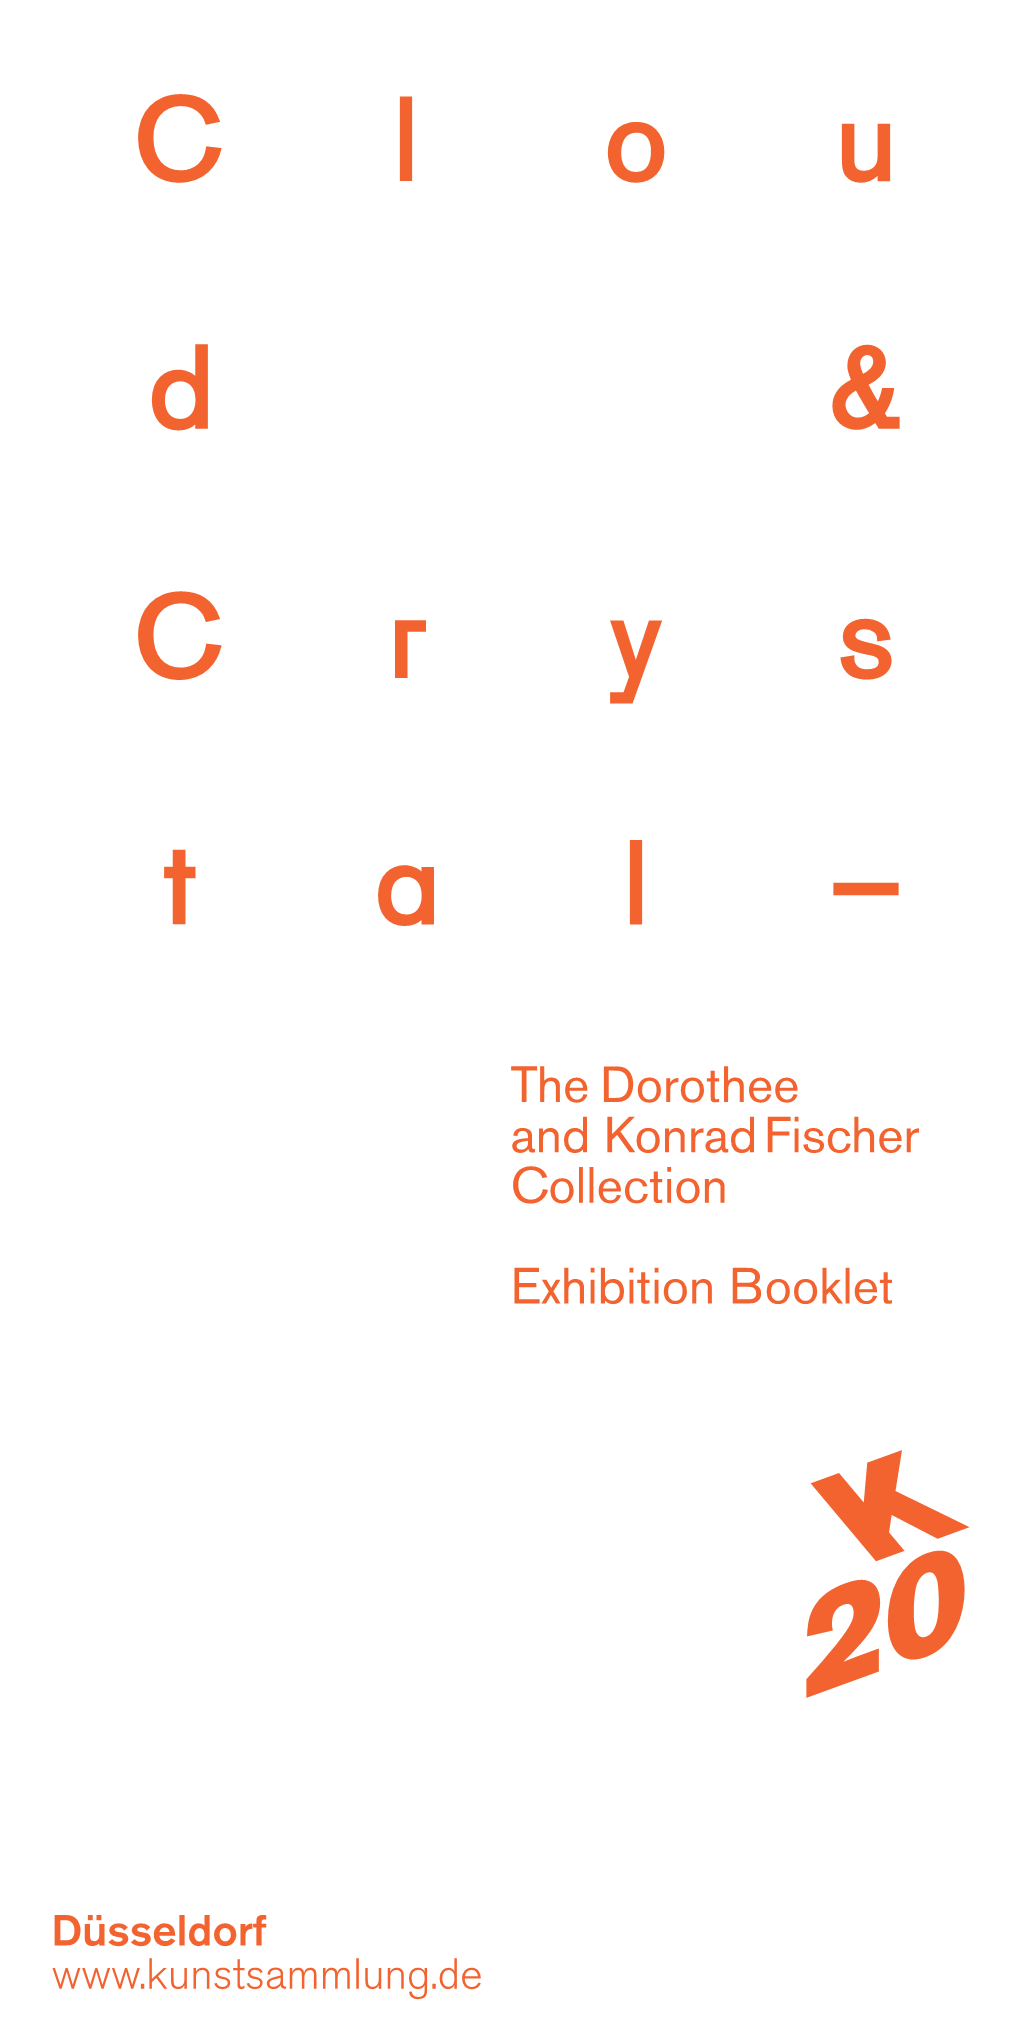 The Dorothee and Konrad Fischer Collection Exhibition Booklet